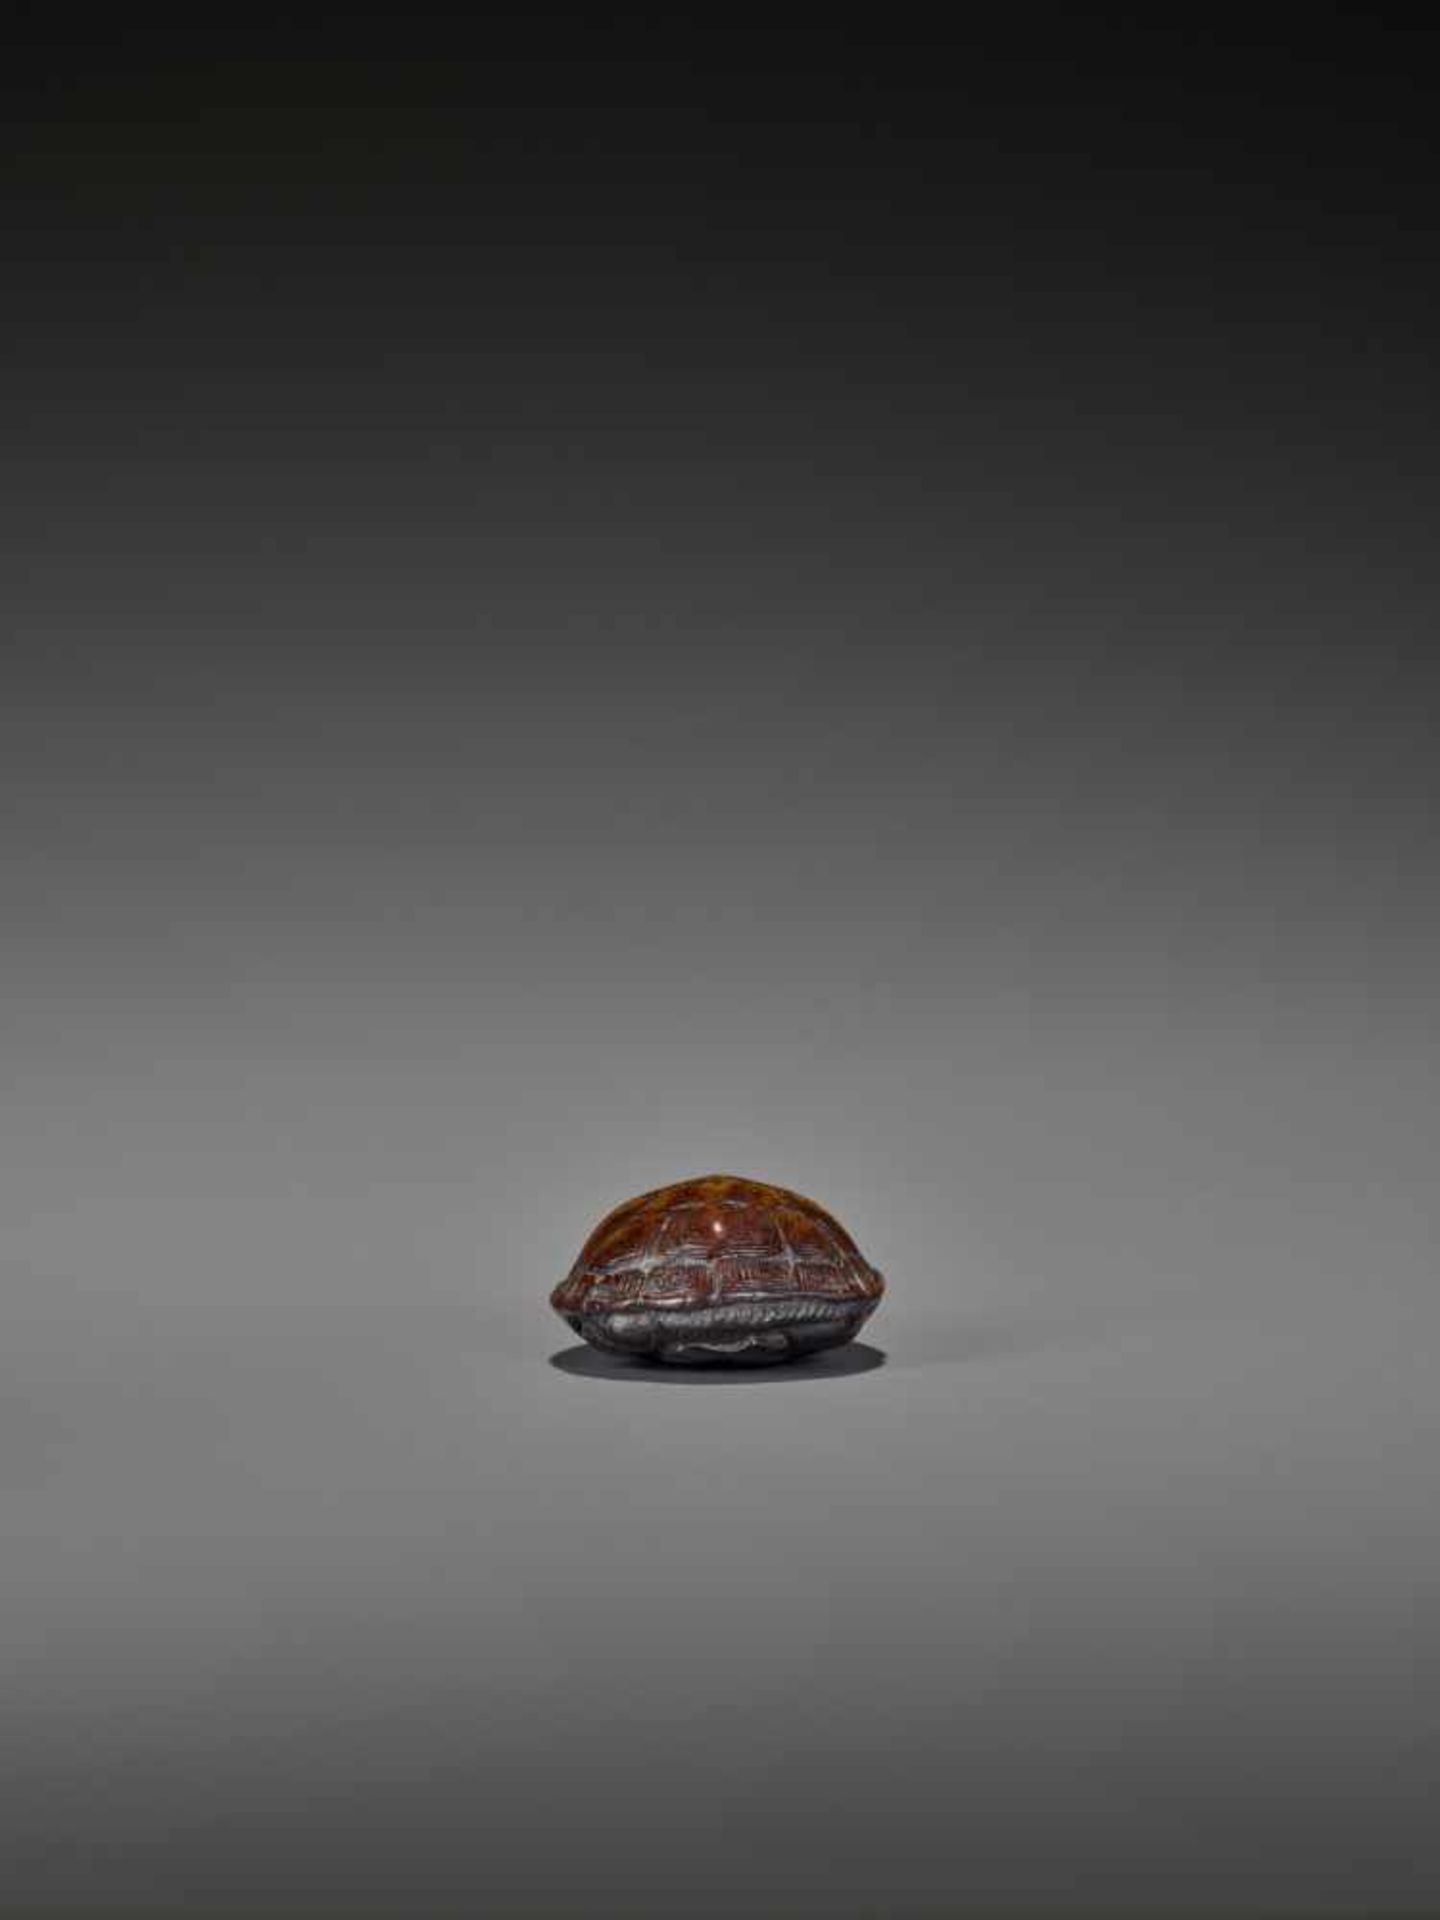 A WOOD NETSUKE OF A RETRACTED TORTOISE UnsignedJapan, 18th century, Edo period (1615-1868)This early - Bild 7 aus 10